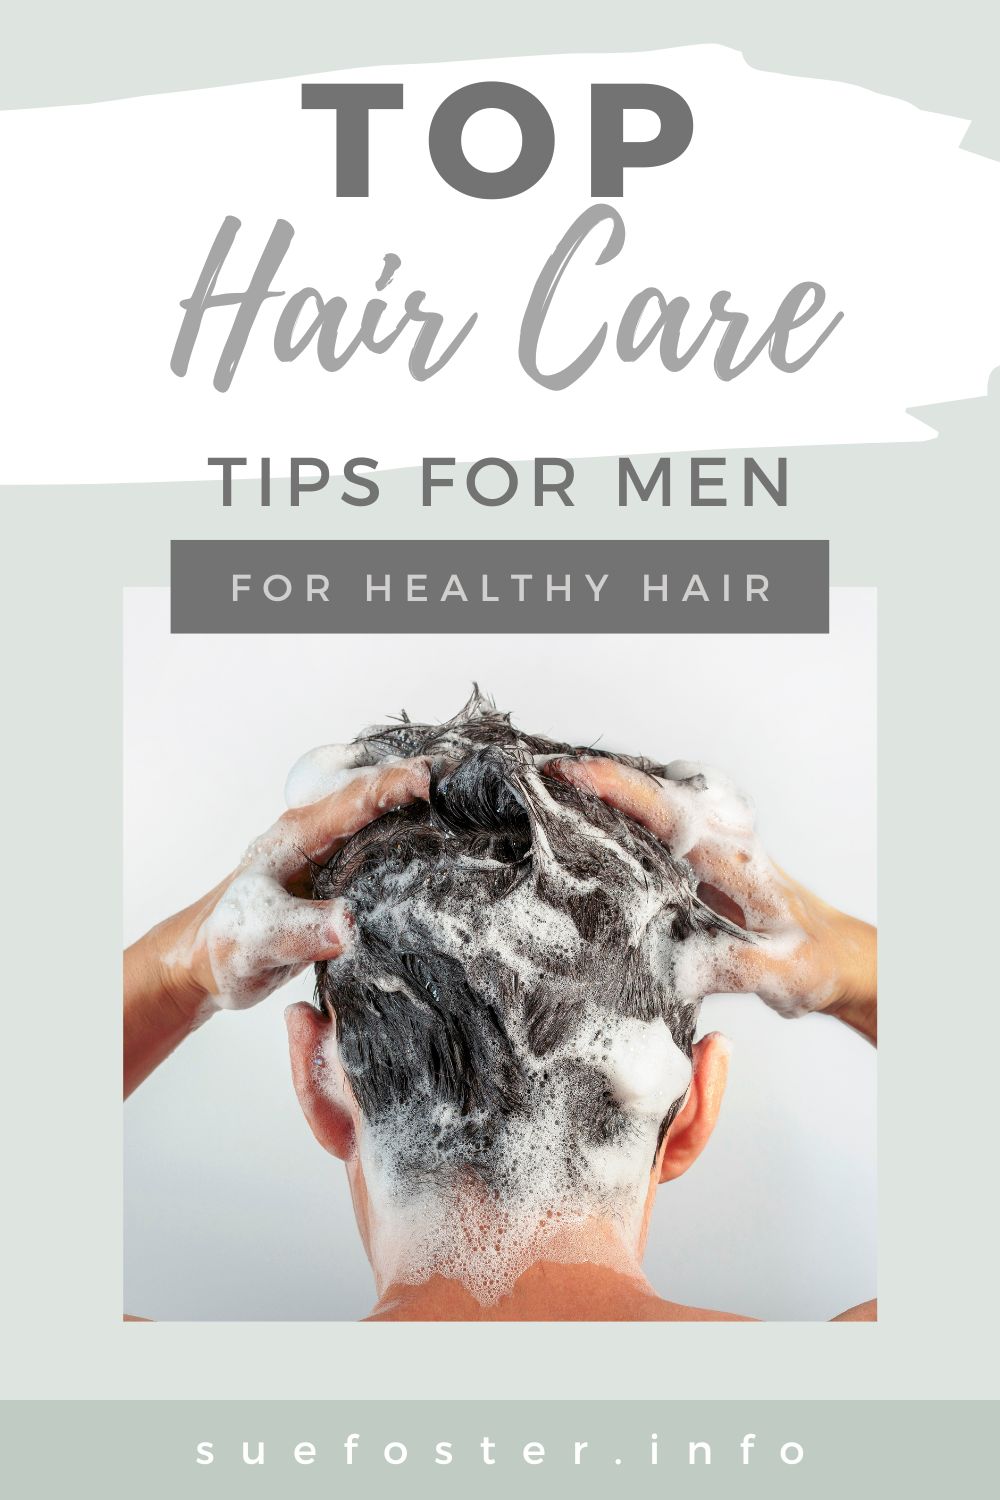 Hair care is crucial in maintaining the health and strength of your hair. Here's what you need to know to do just that.